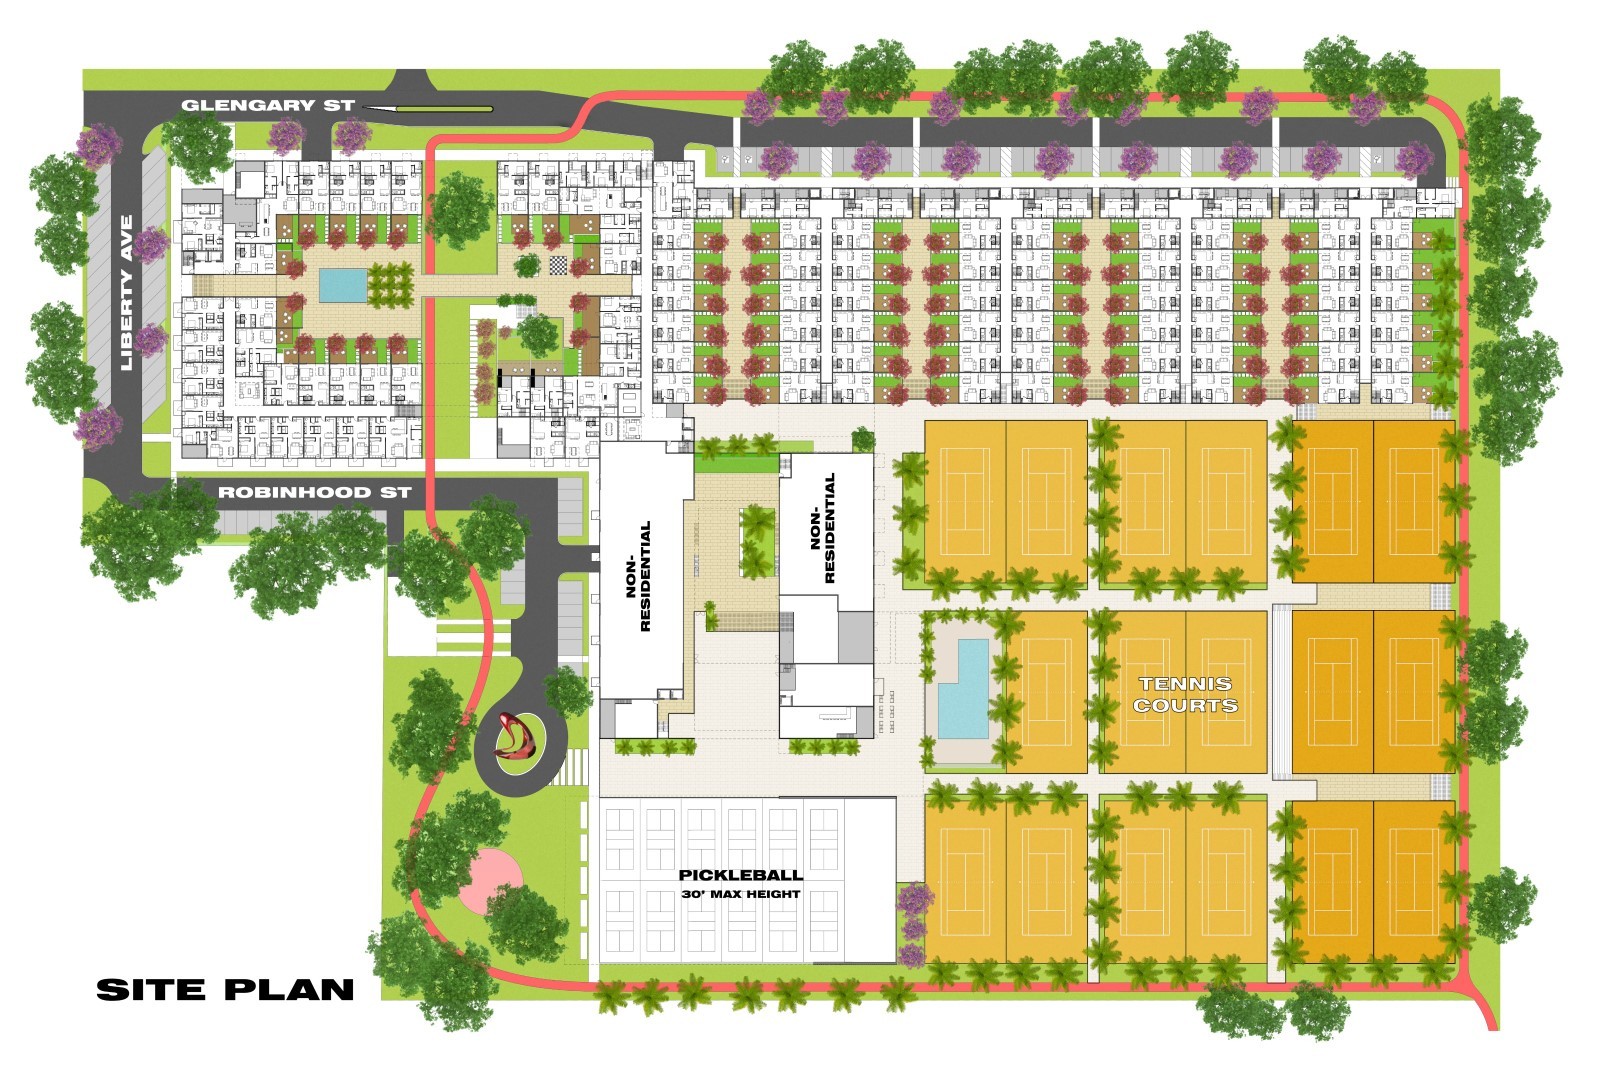 There is a preliminary site plan for redeveloping the Bath and Racquet Club, but property owners are holding off on submitting an application until they find investors to build out the project. Image courtesy Halflants + Pichette.